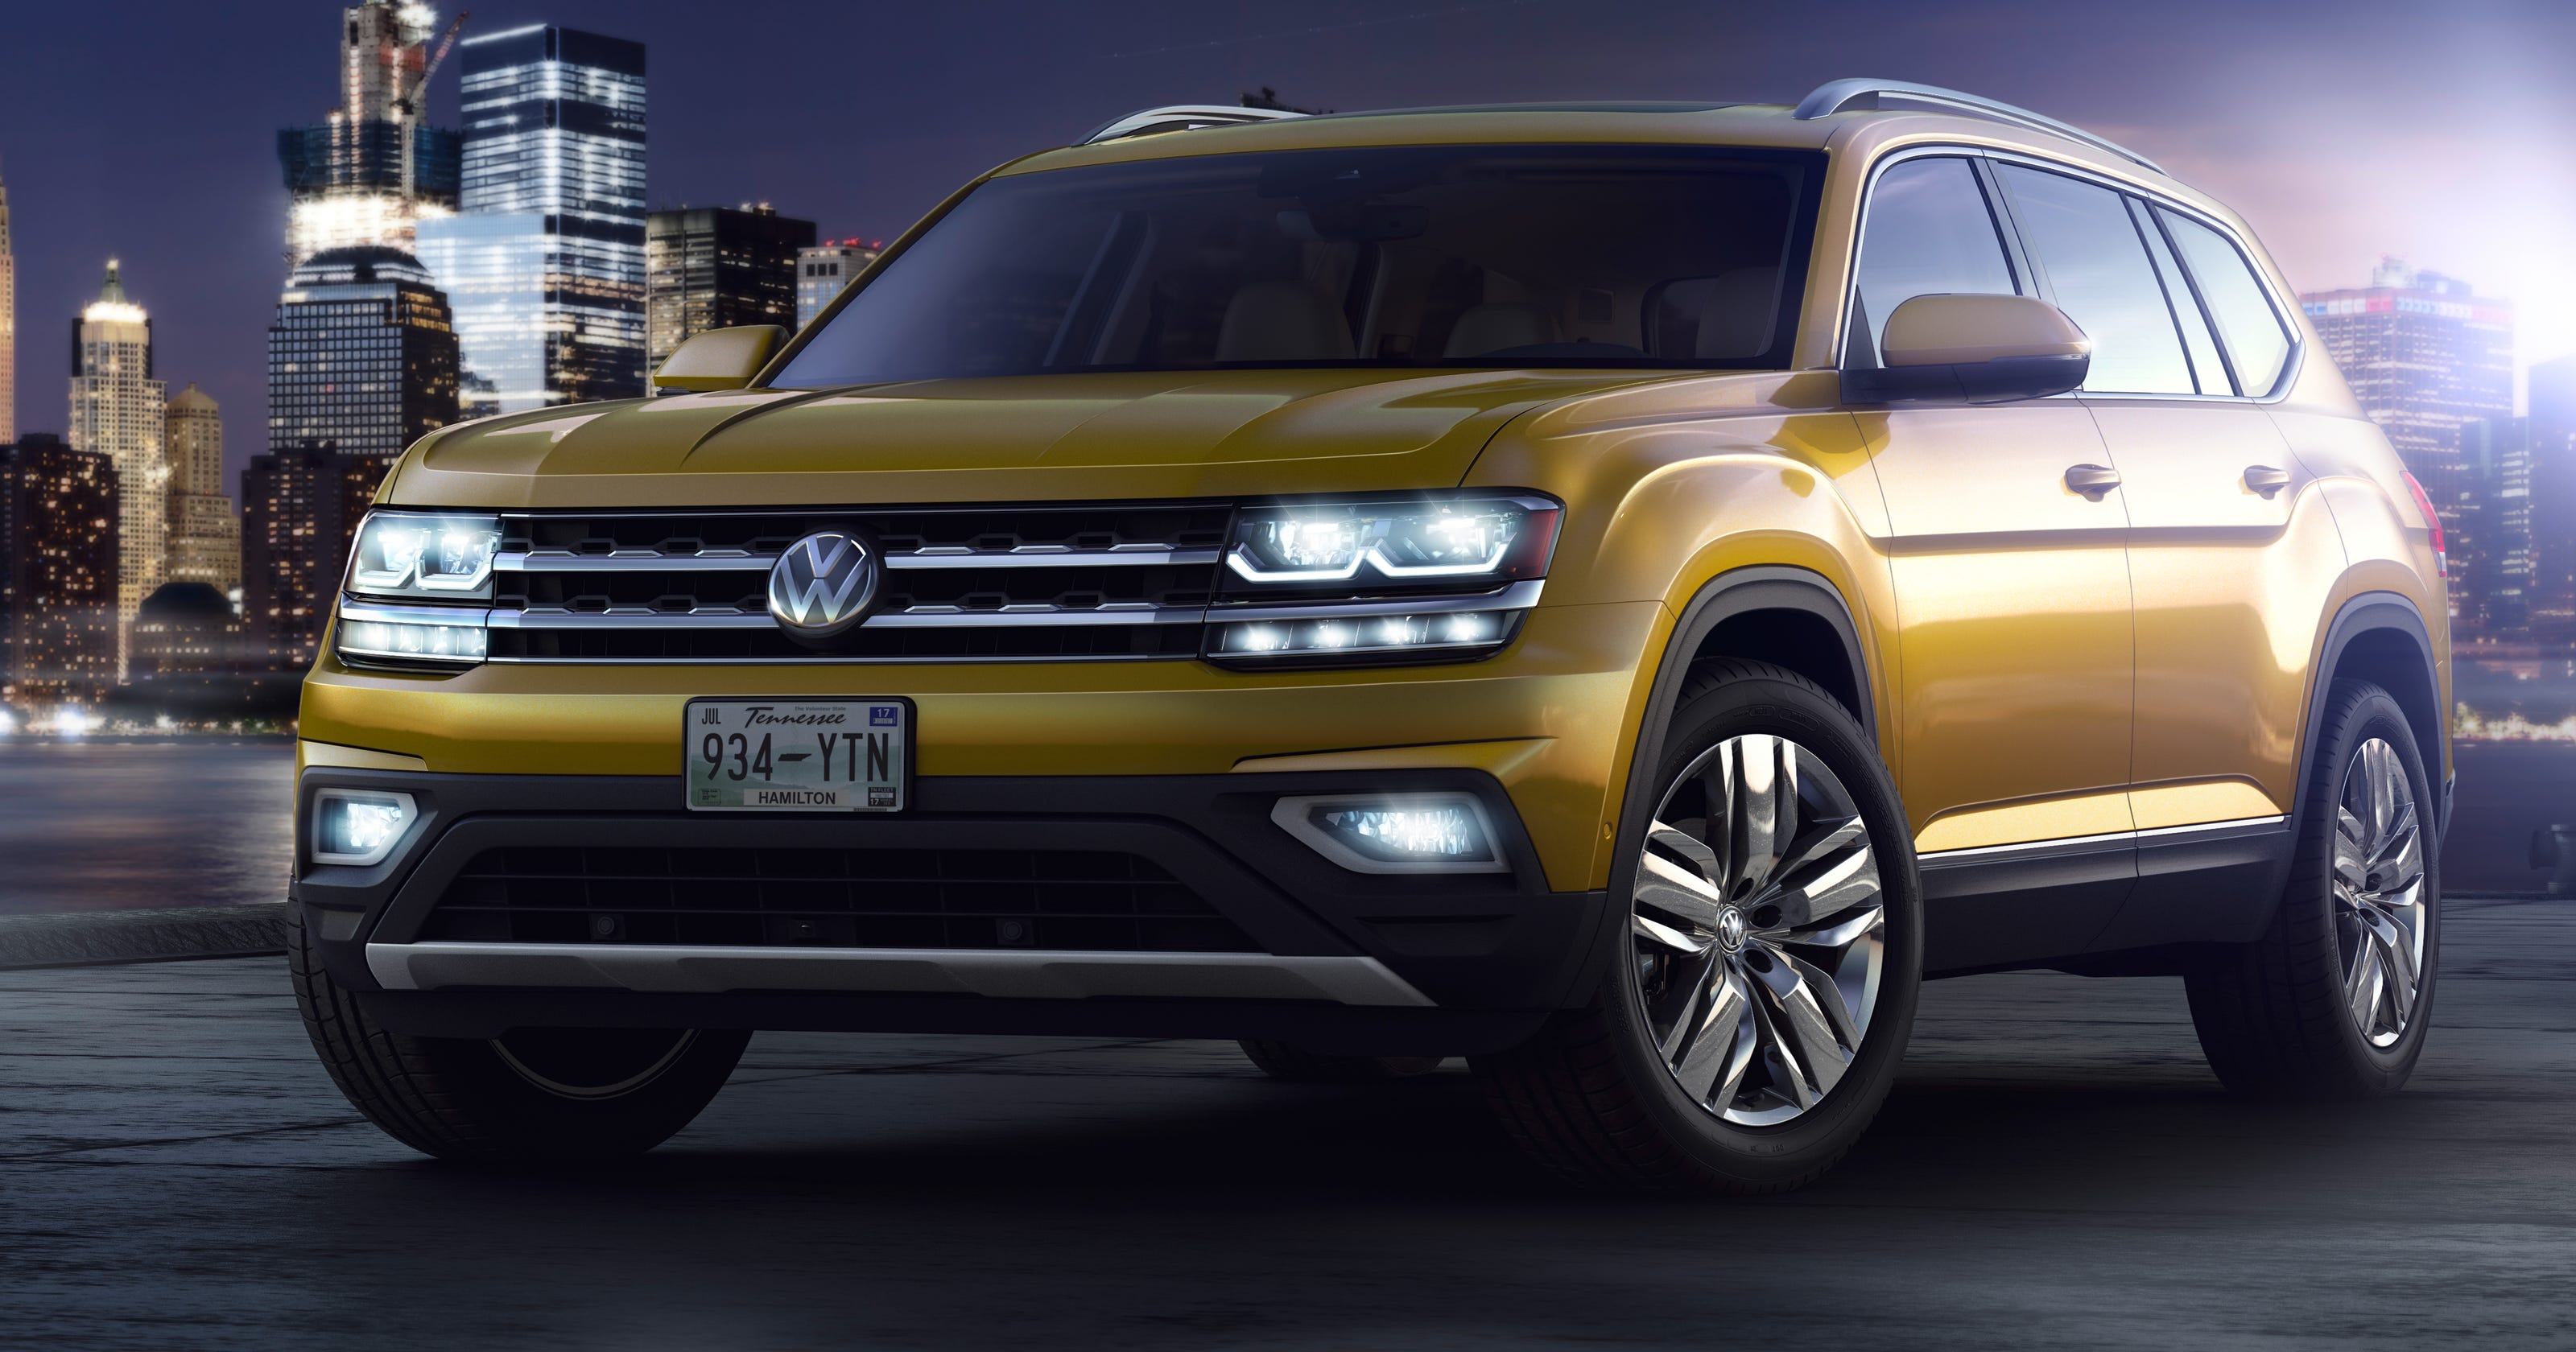 Volkswagen unveils new 2018 Atlas, its largest SUV for U.S.